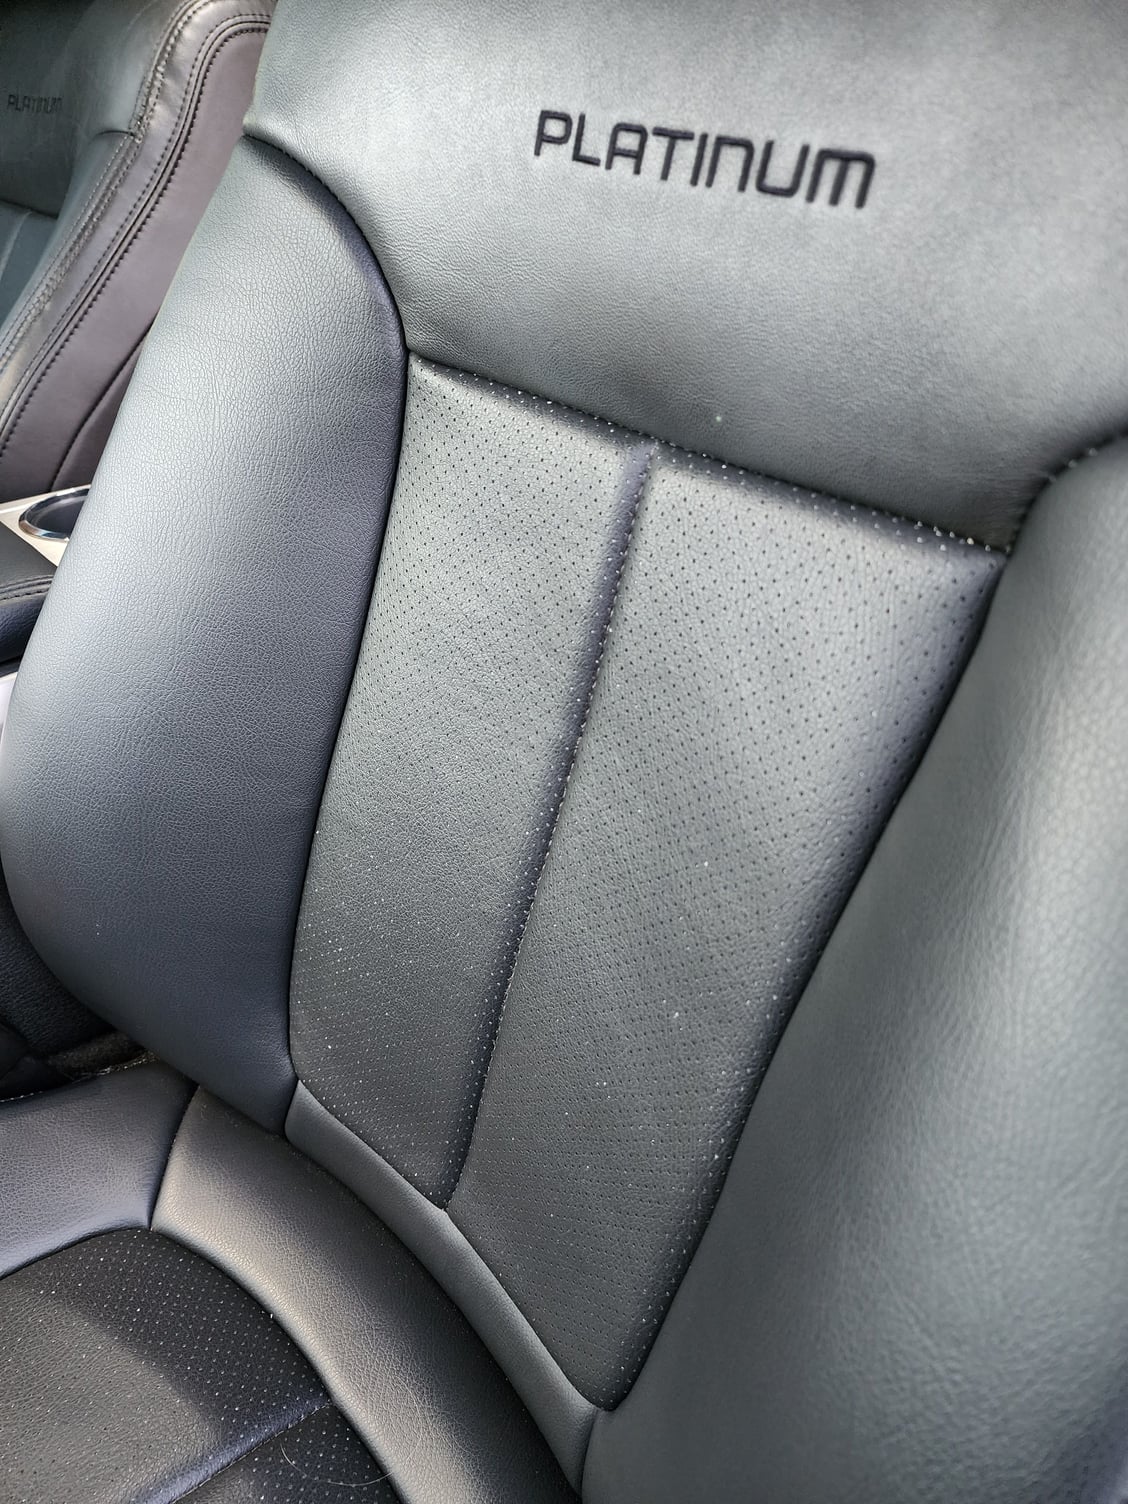 Seat cushion issues cooled seats help - Ford F150 Forum - Community of ...